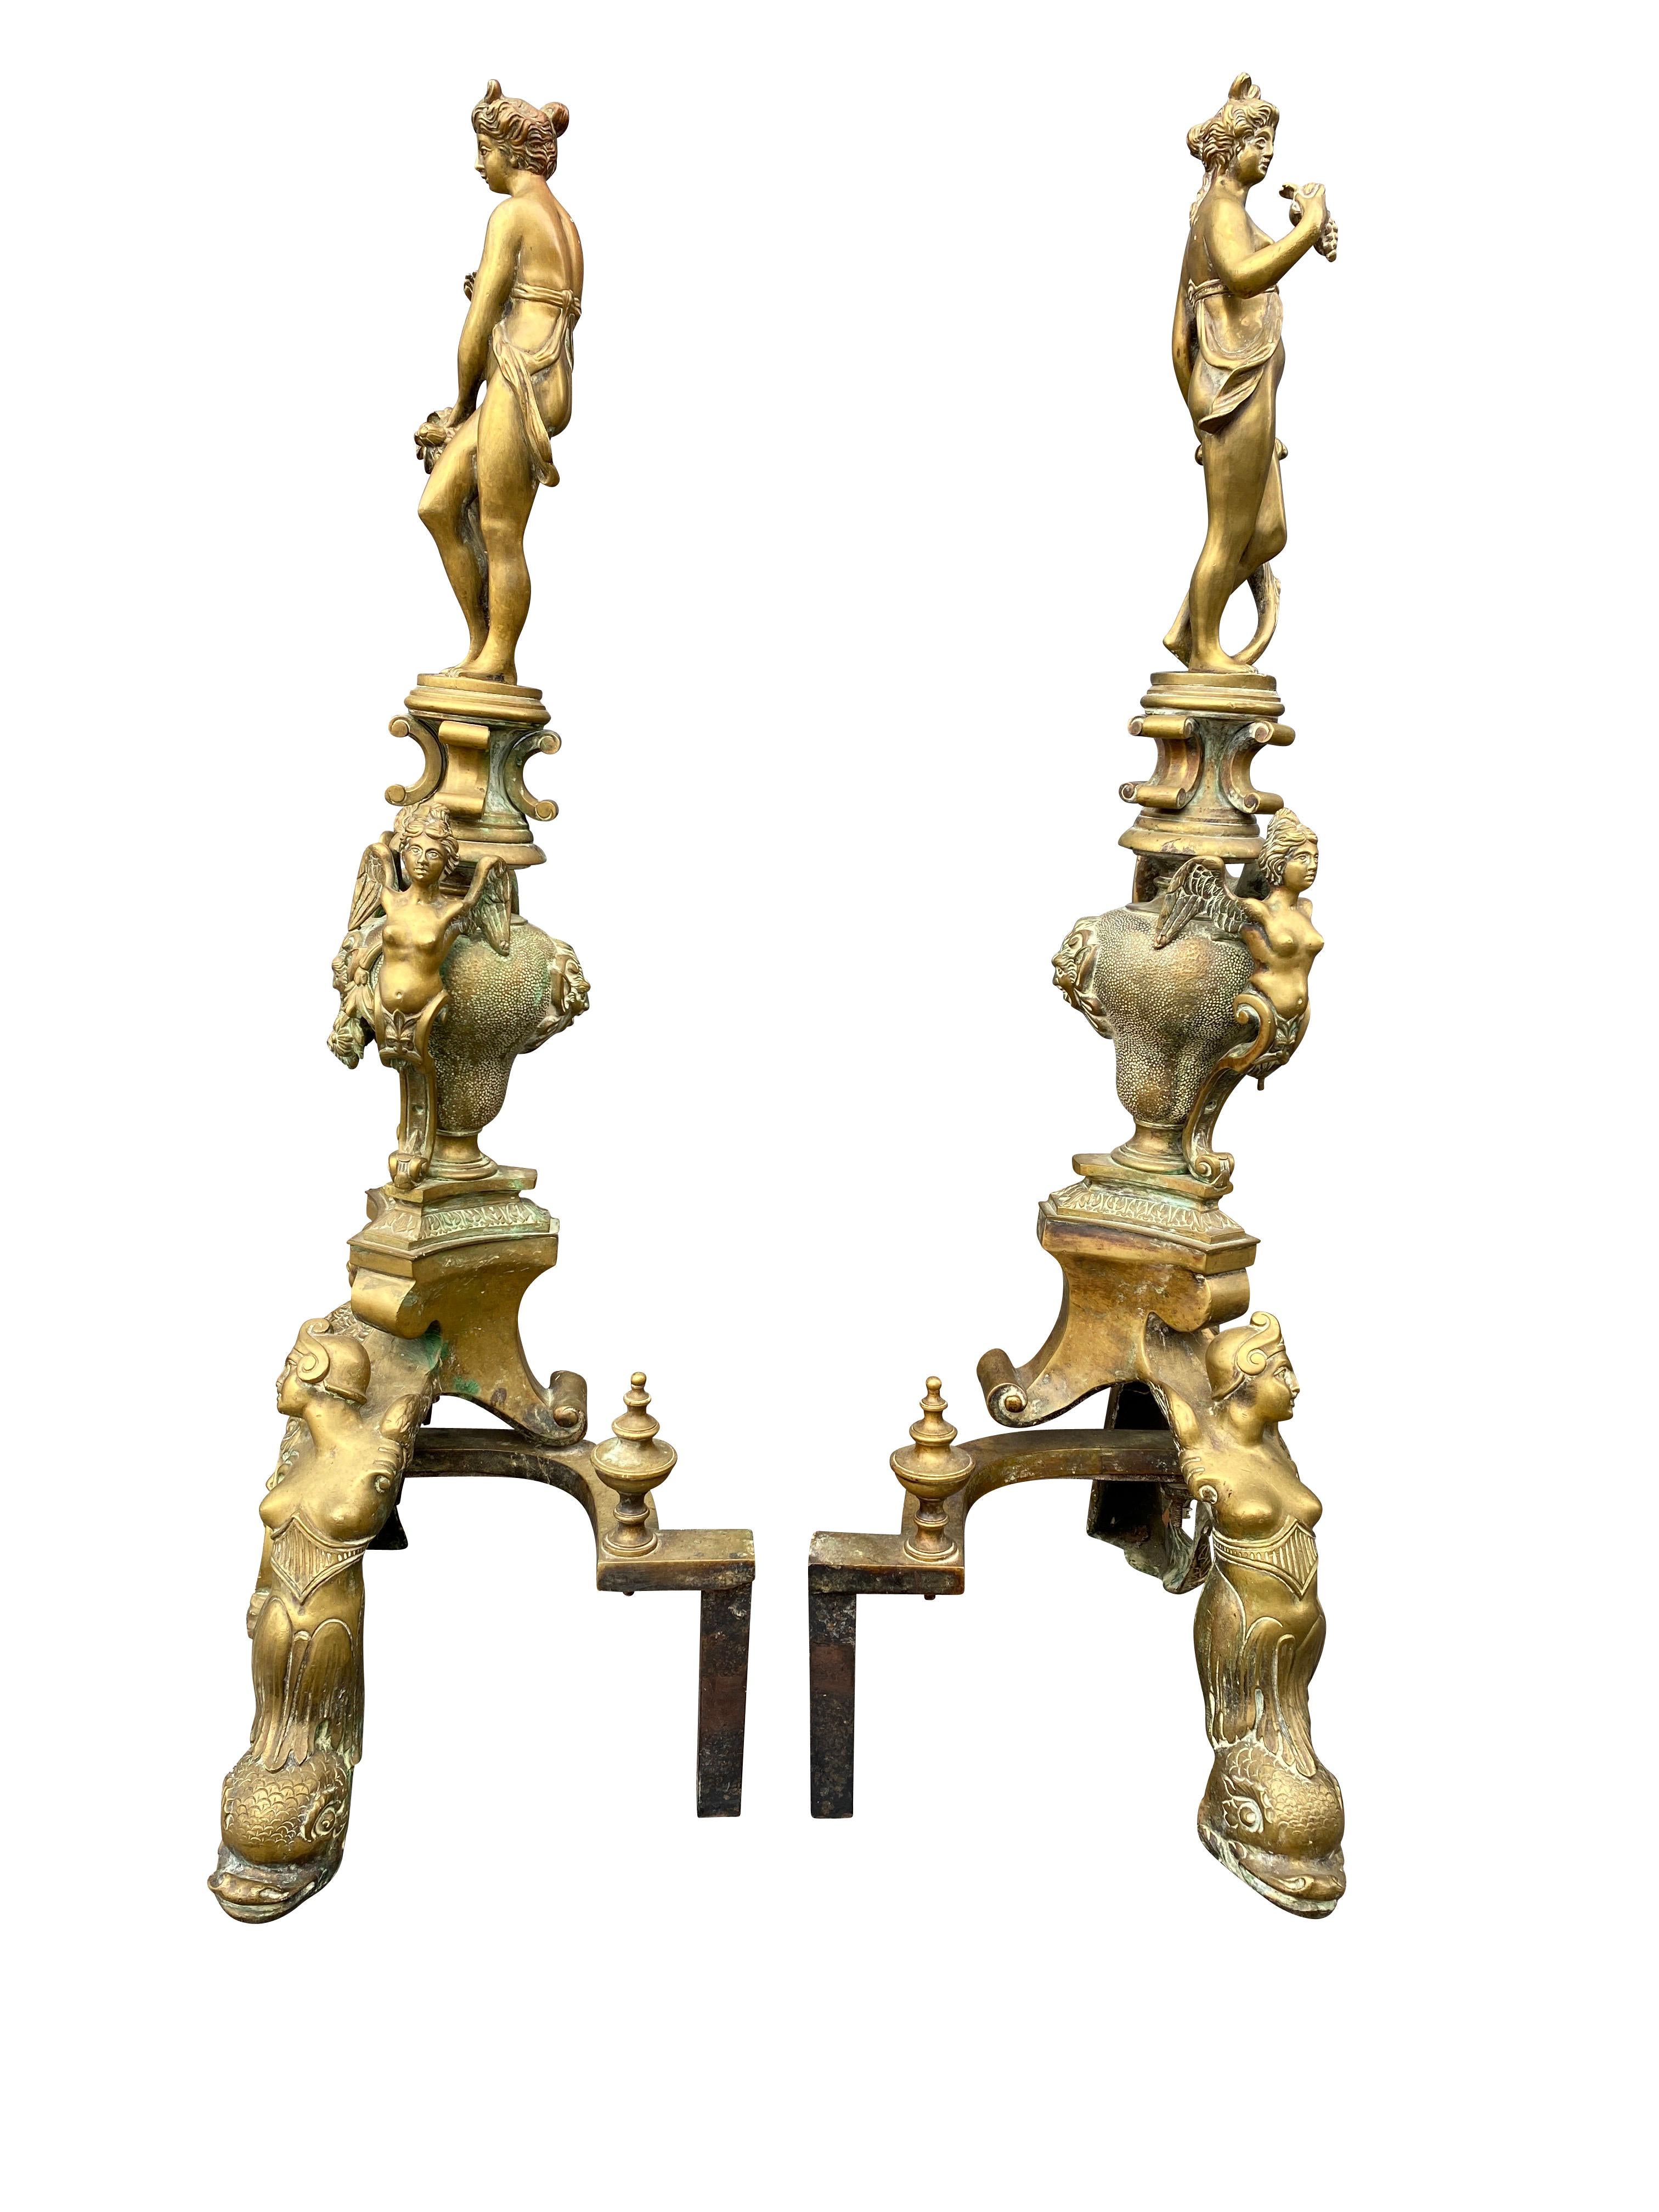 Pair of Italian Renaissance Revival Bronze Andirons In Good Condition For Sale In Essex, MA